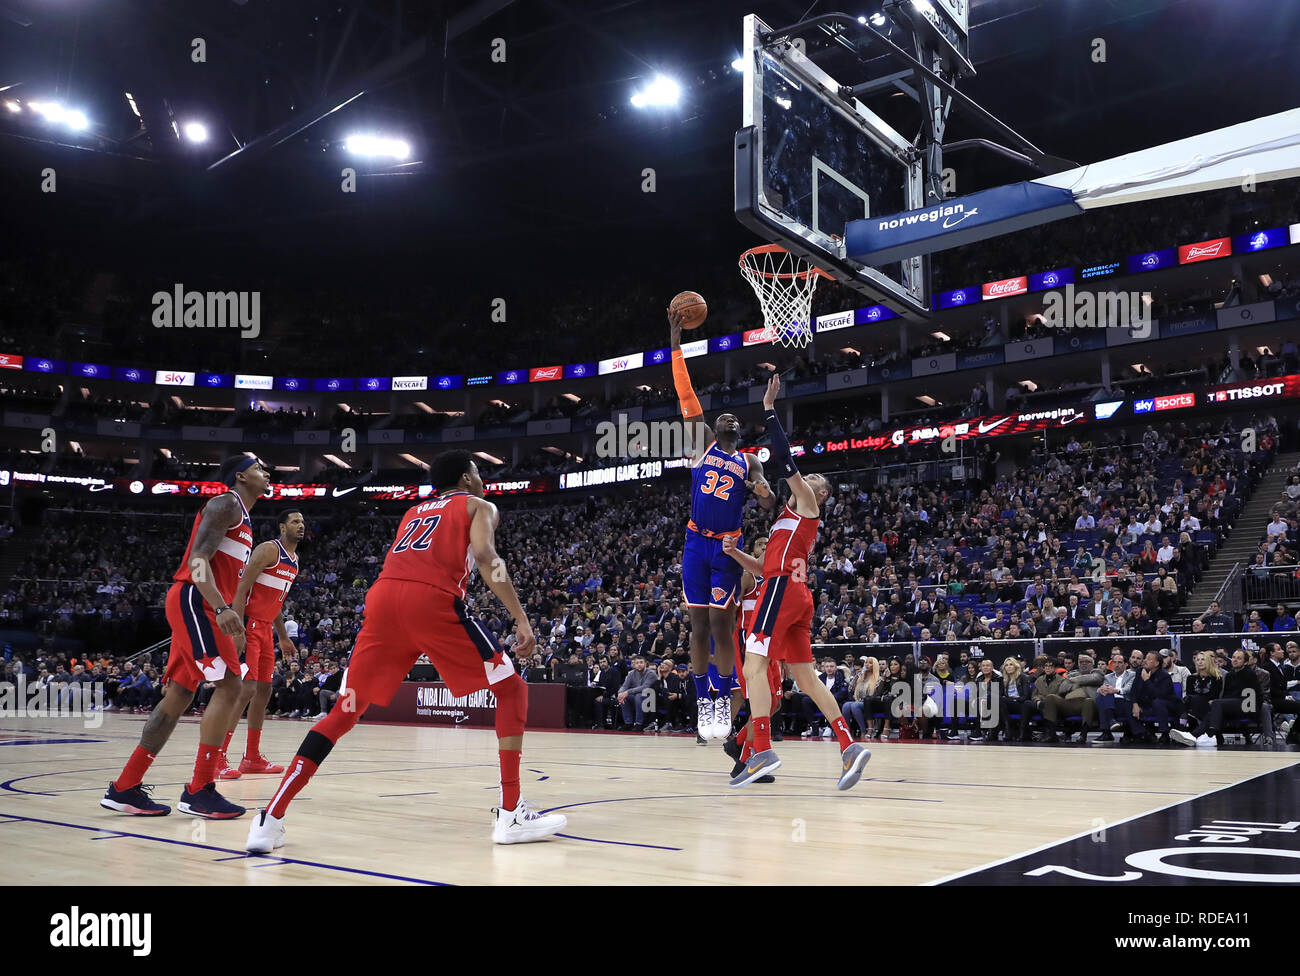 New York Knicks' Noah Vonleh stretches for the hoop during the NBA London Game 2019 at the O2 Arena, London. Stock Photo